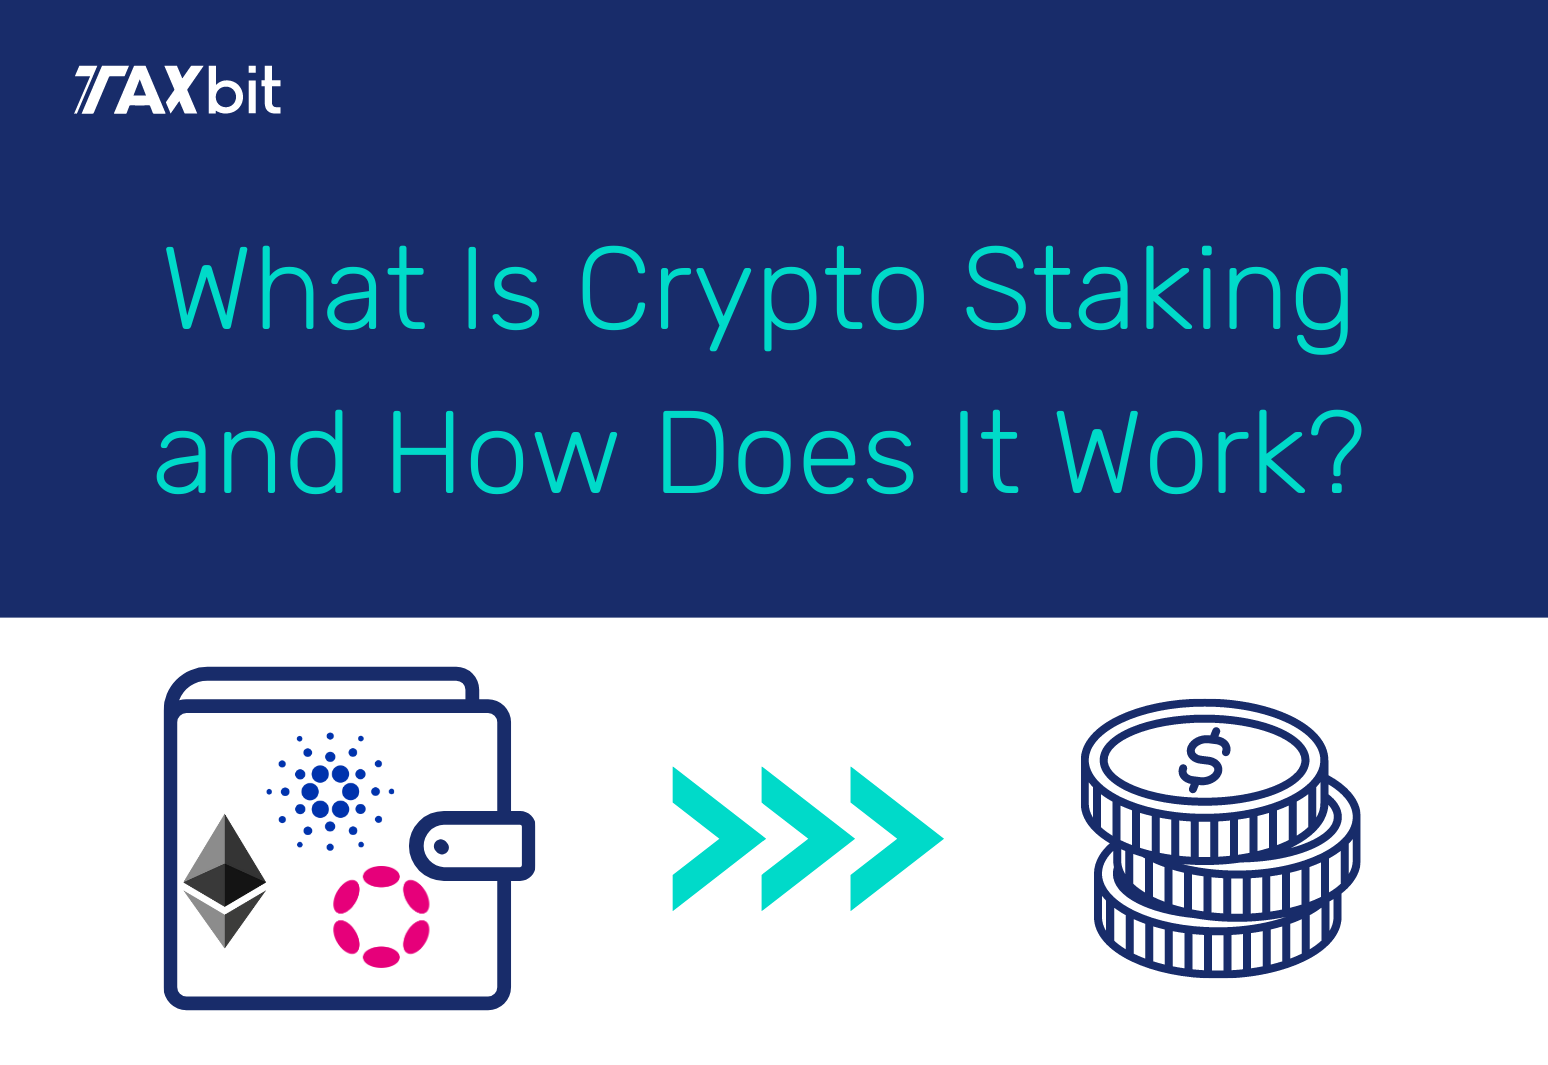 what is staking a crypto coin